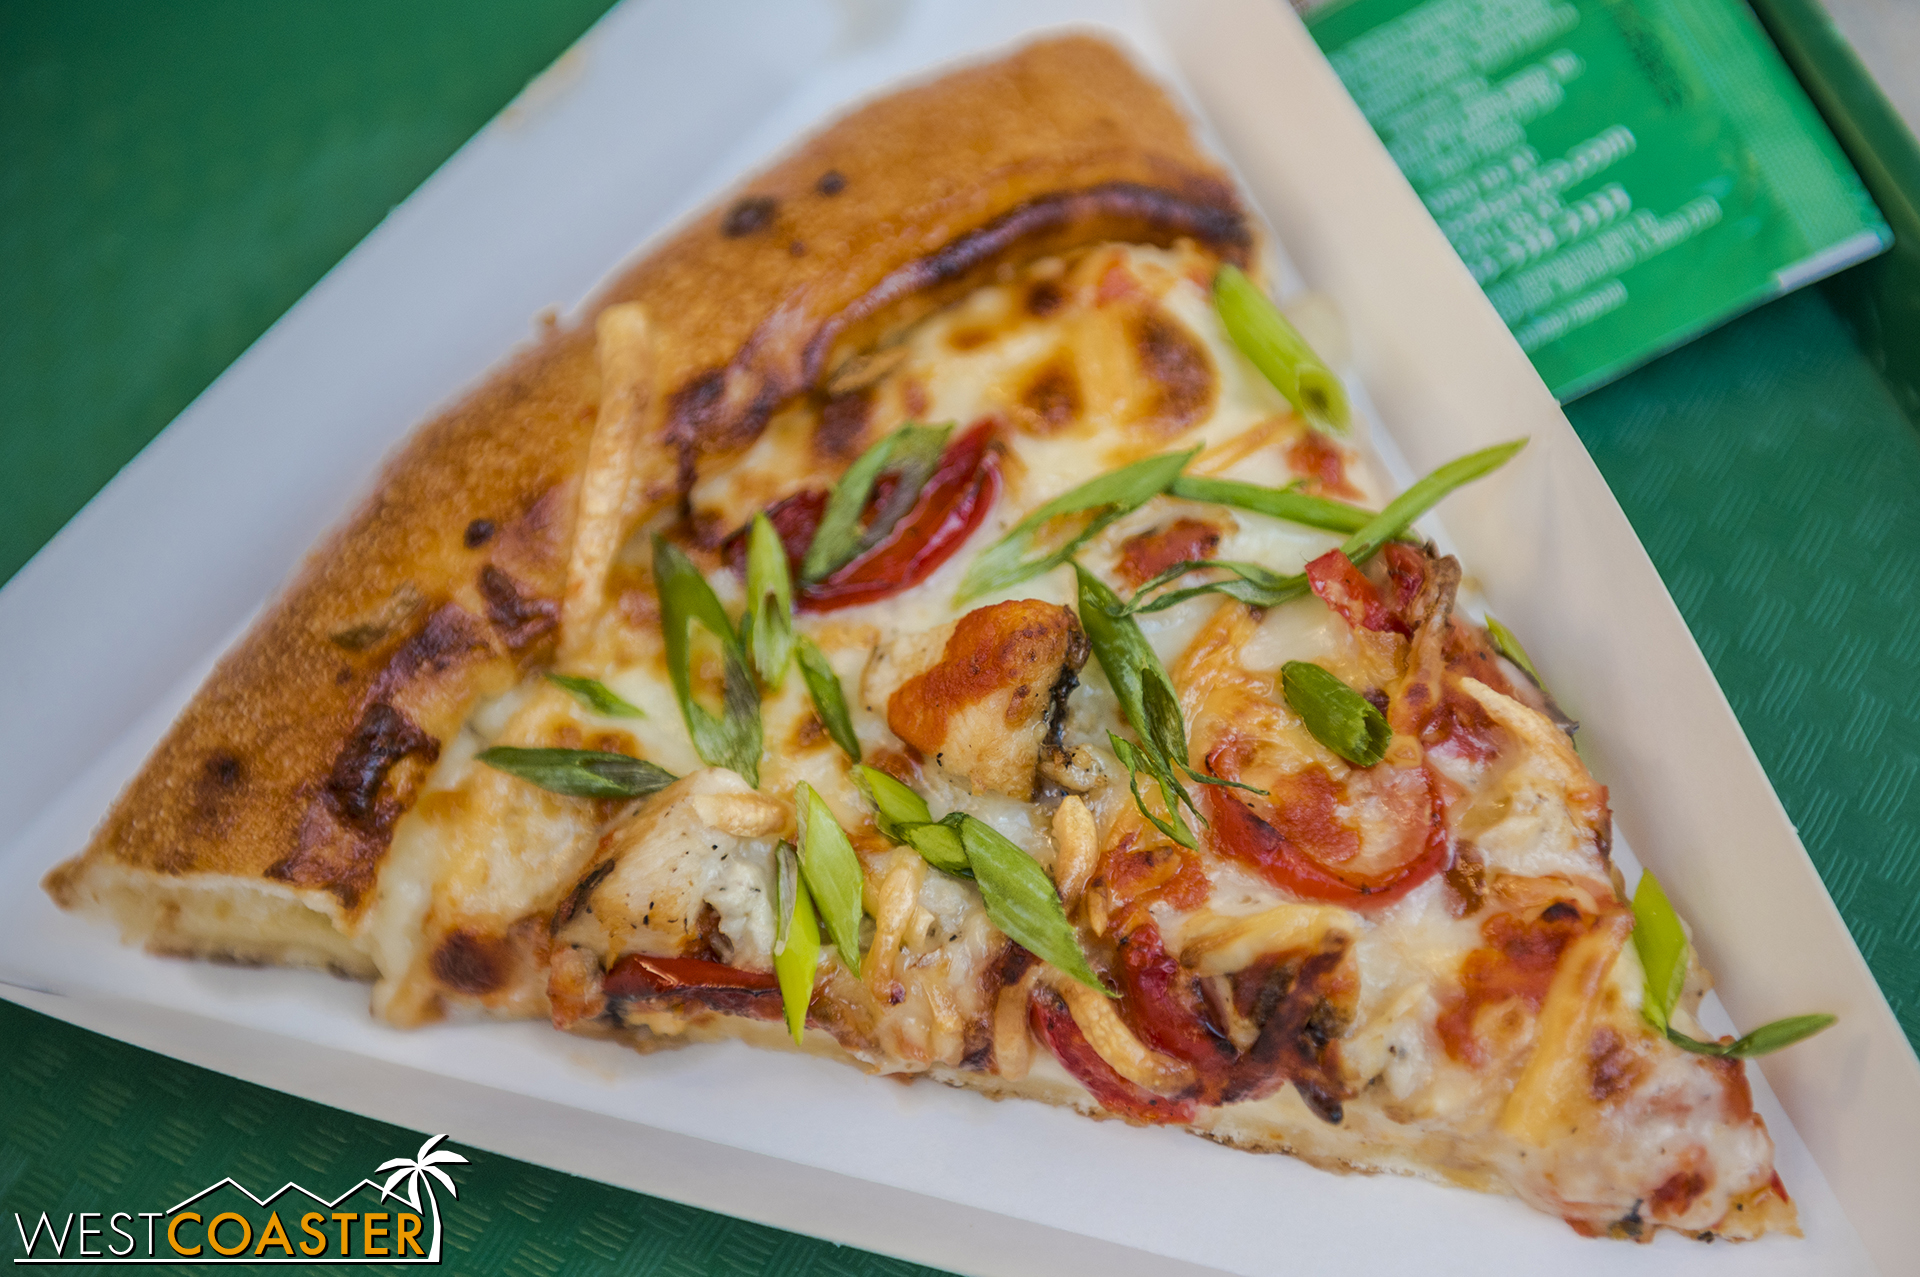  The Anti-Vampire Pizza has roasted garlic sauce, marinated chicken, smoked Gouda, mozzarella, roasted red peppers and a tomato-harissa sauce drizzle.  And green onions.  I’m not sure I got any chicken, but the pizza is still very savory and deliciou